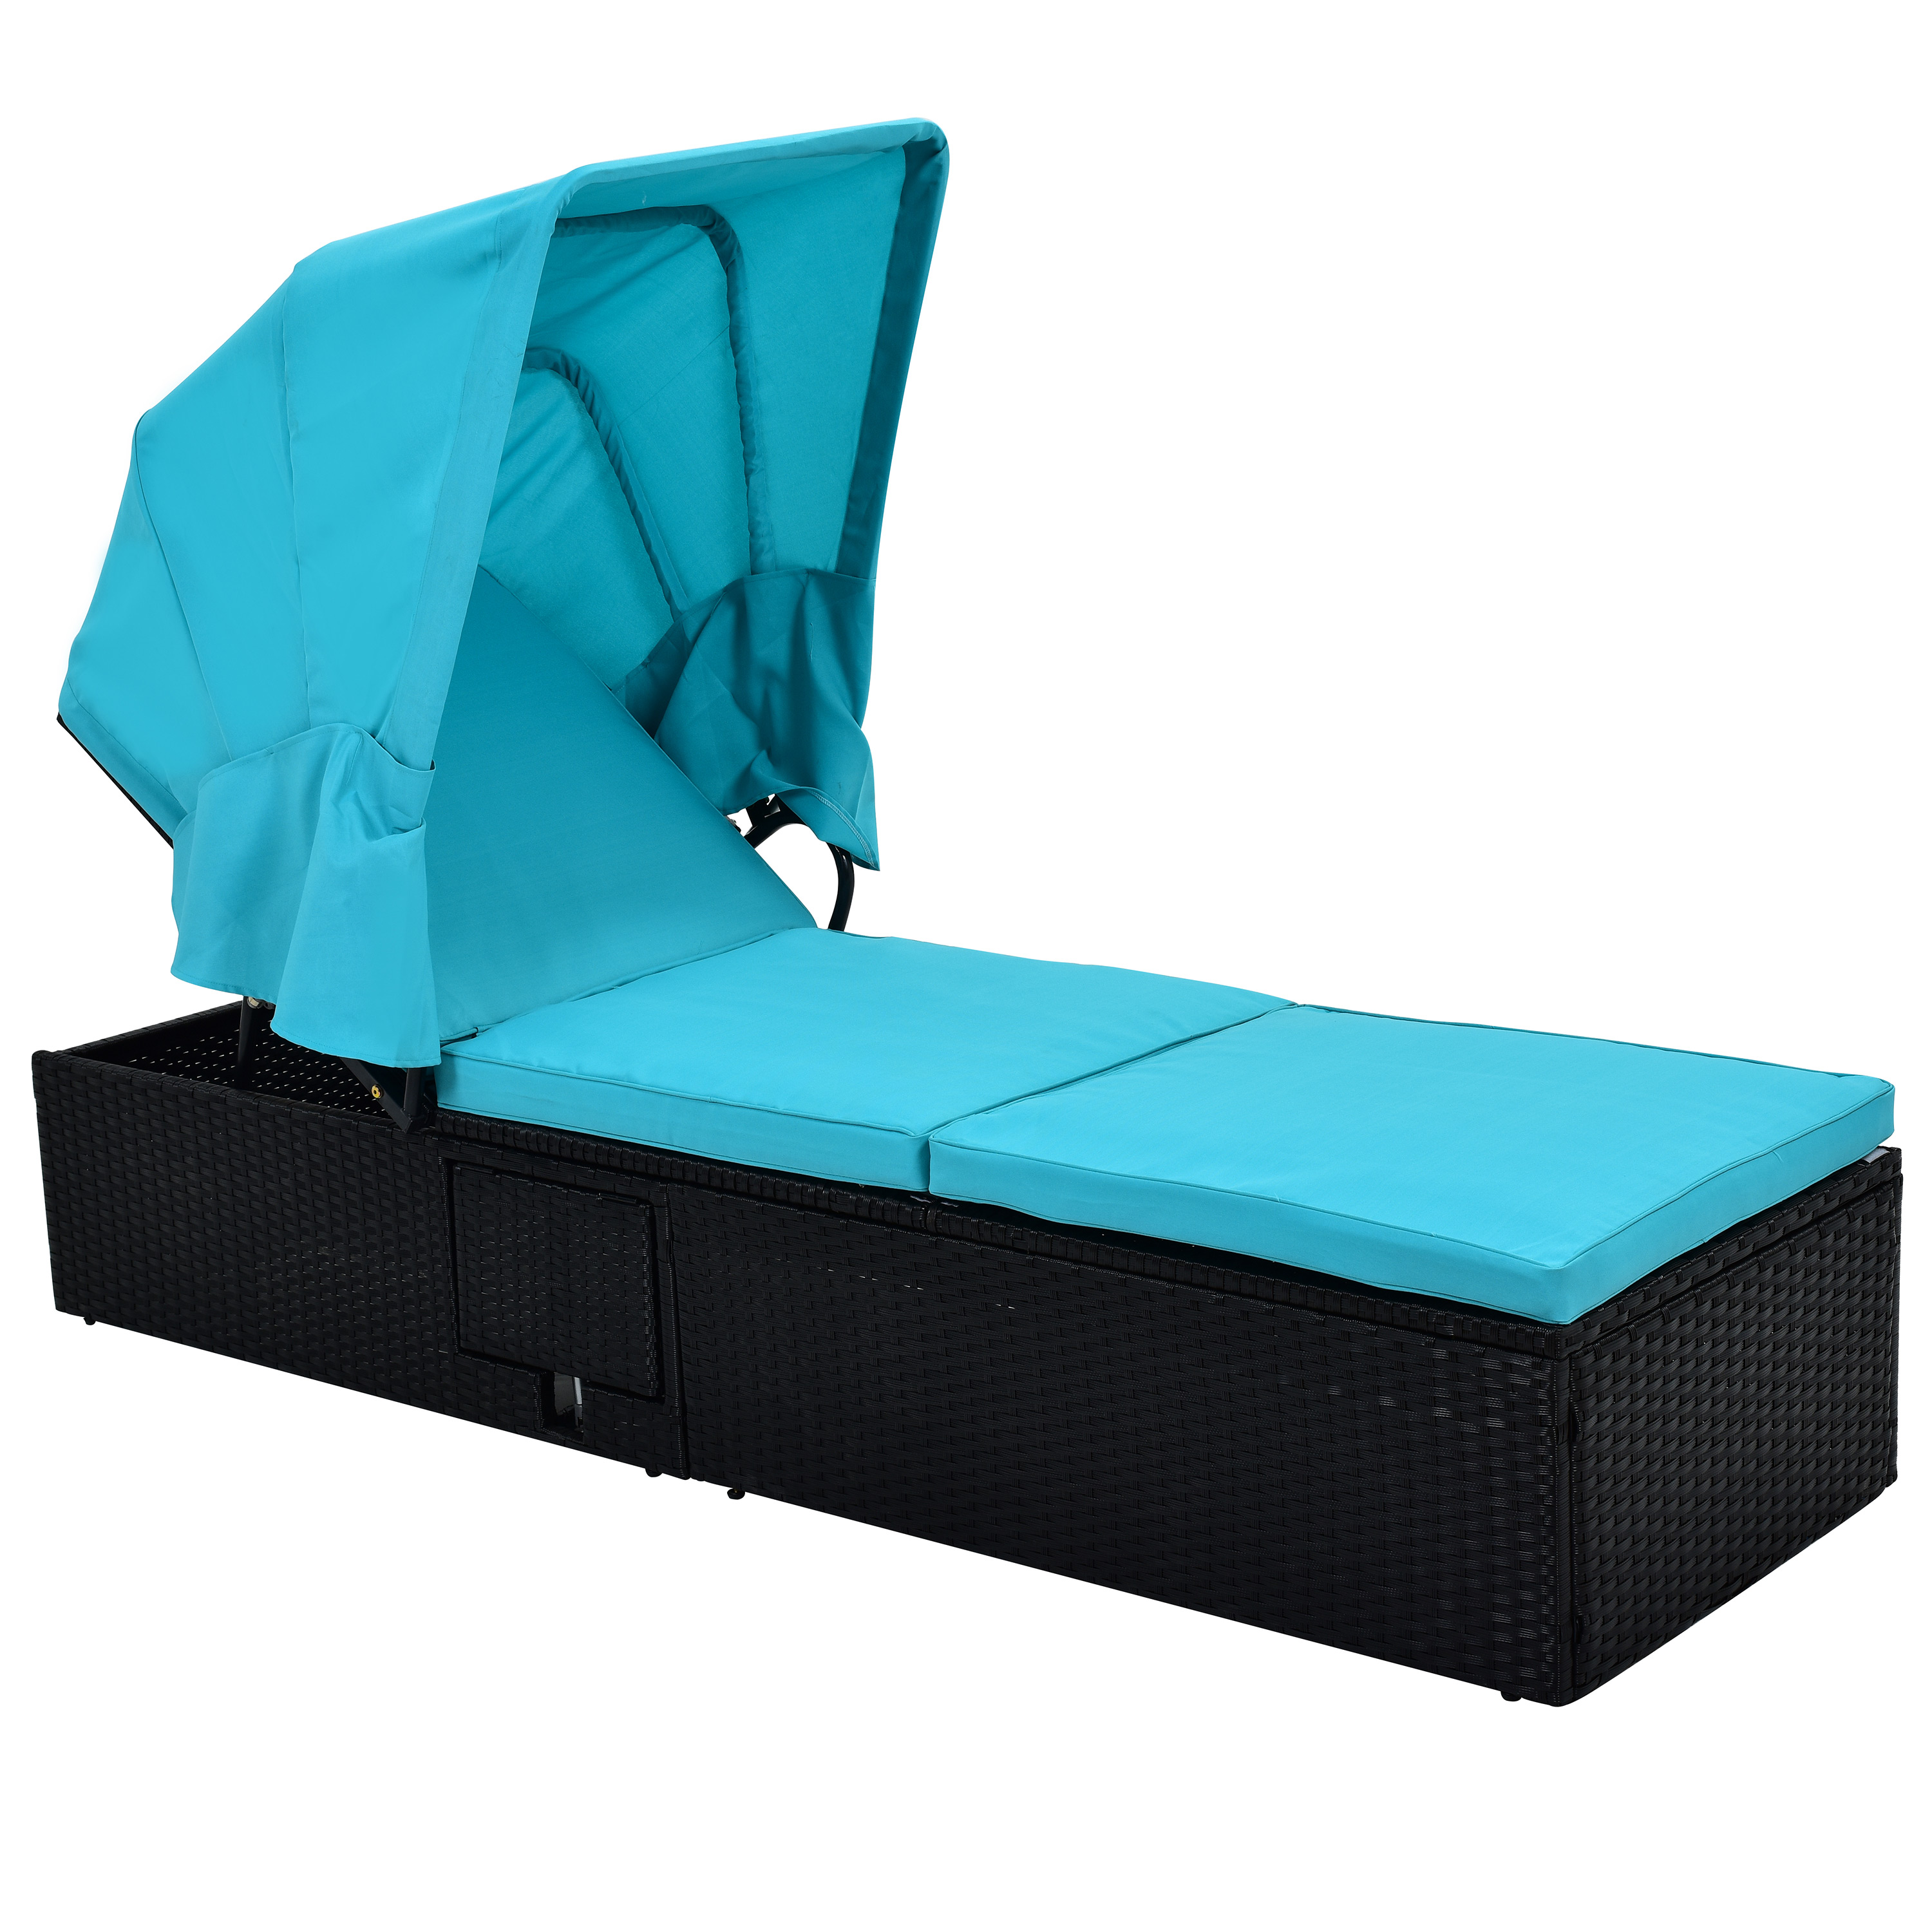 Seizeen 76.8" Outdoor Chaise Lounge, Patio Single Chaise Lounge with Cushions, Canopy and Cup Table, Adjustable Lounge Chairs for Outside Garden Pool, Blue - image 2 of 8